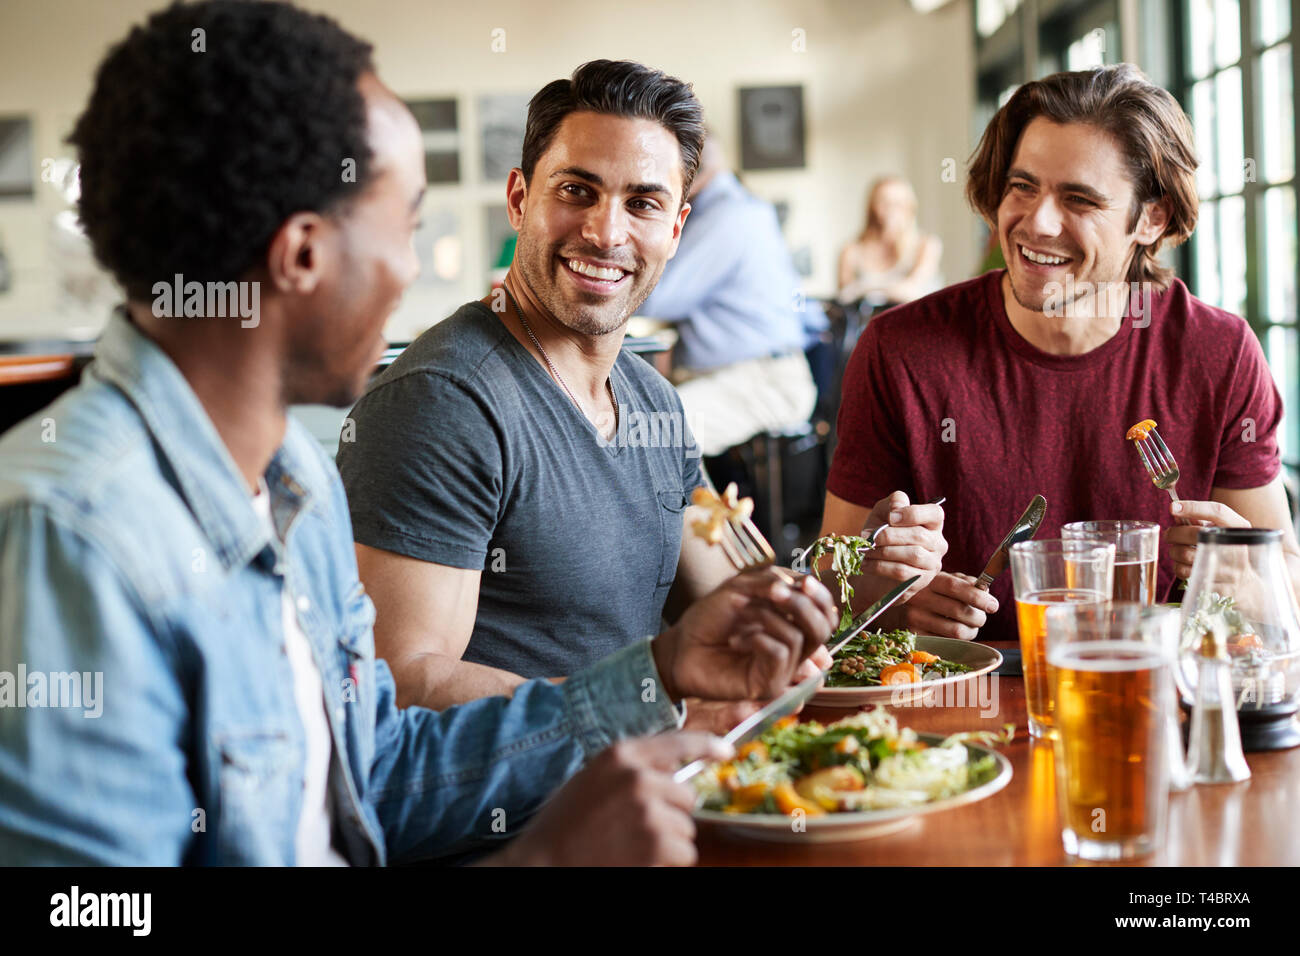 Group Of Male Friends Enjoying Meal In Restaurant Together Stock Photo